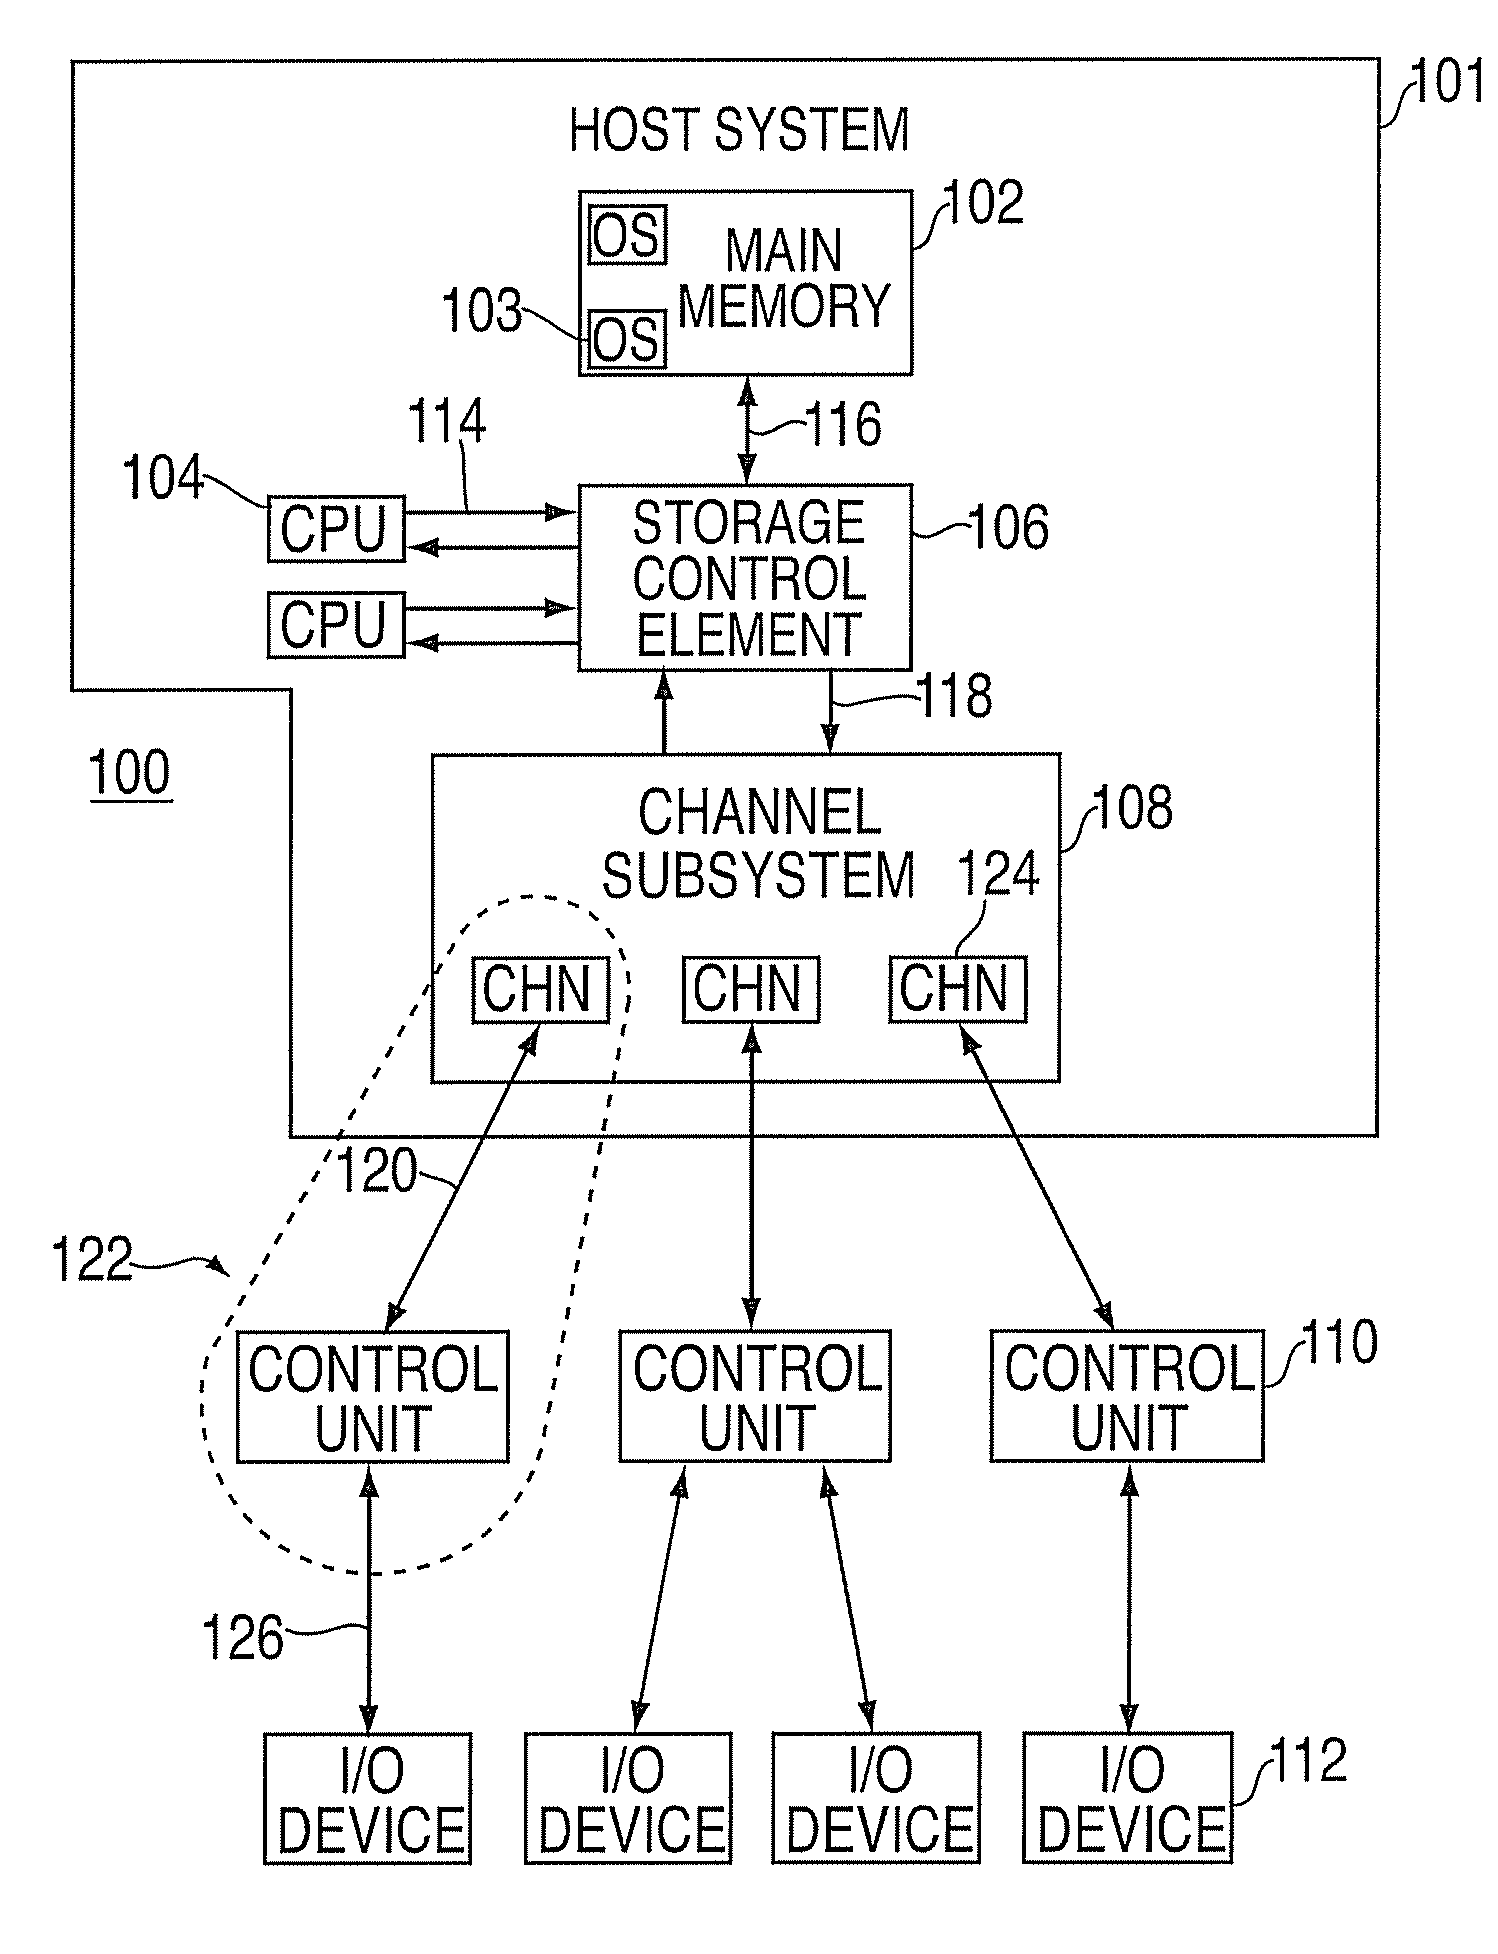 Exception condition handling at a channel subsystem in an I/O processing system